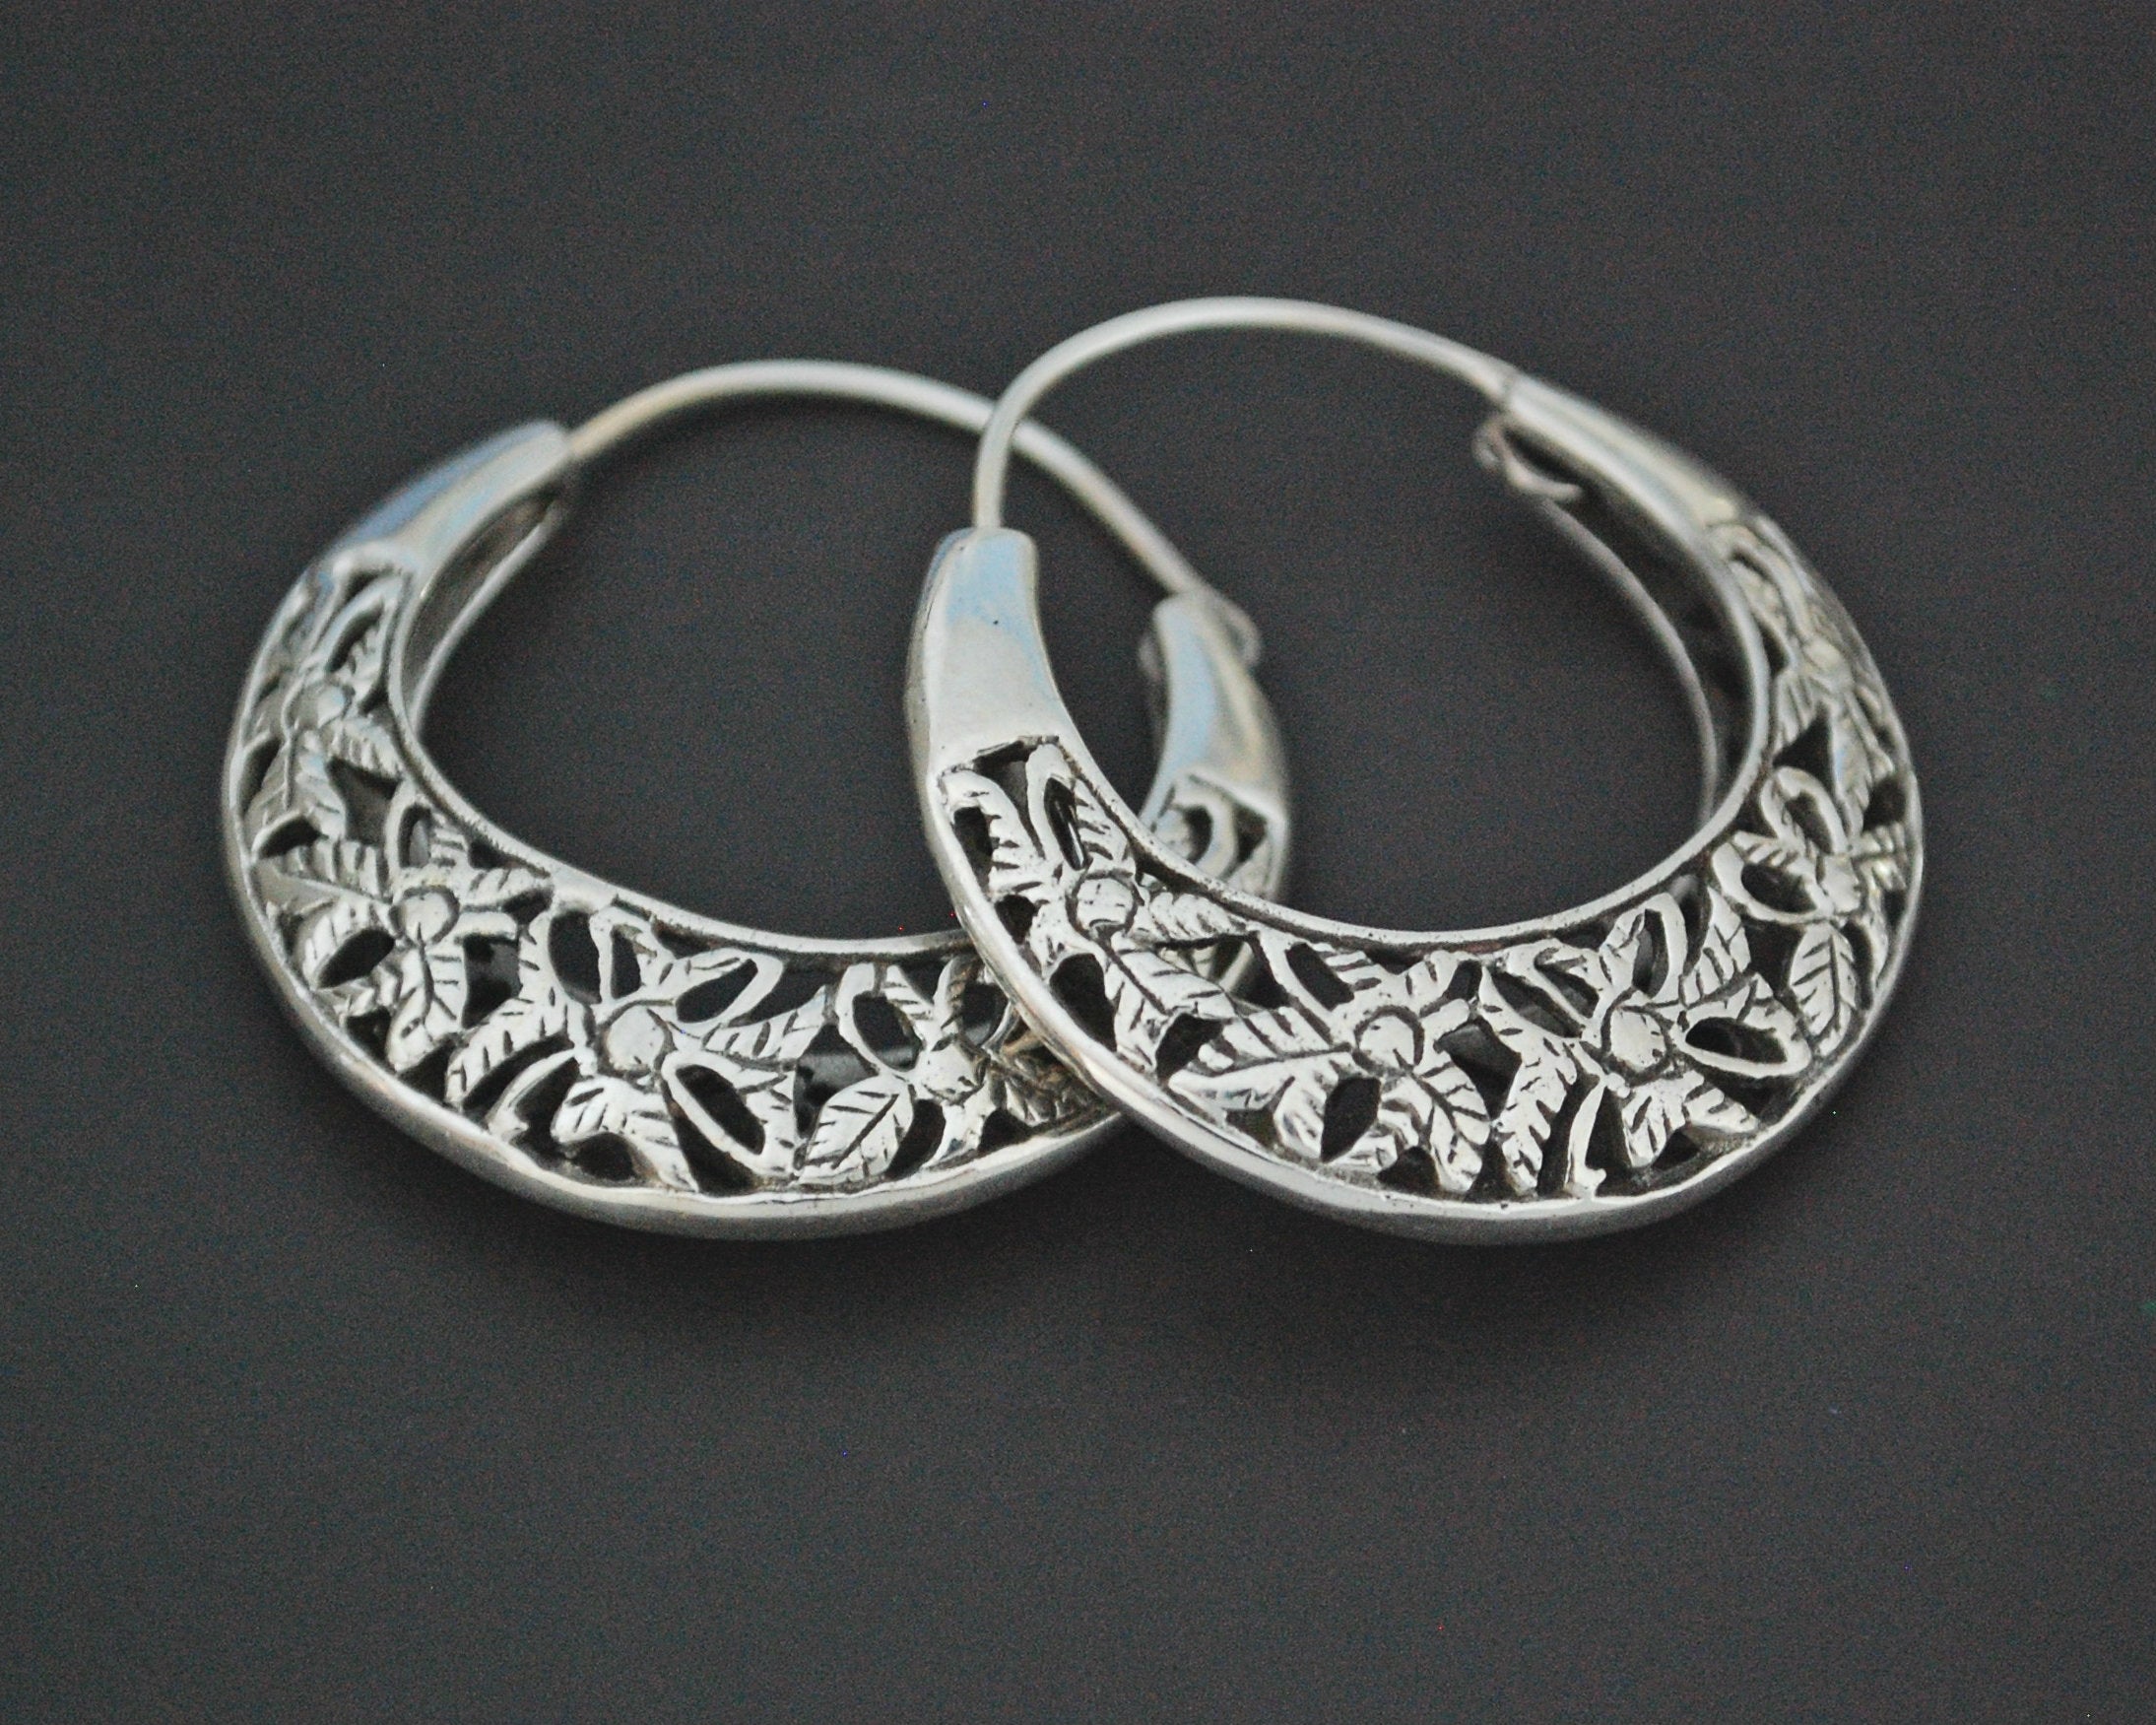 Ethnic Hoop Earrings with Flower Cut Out Design